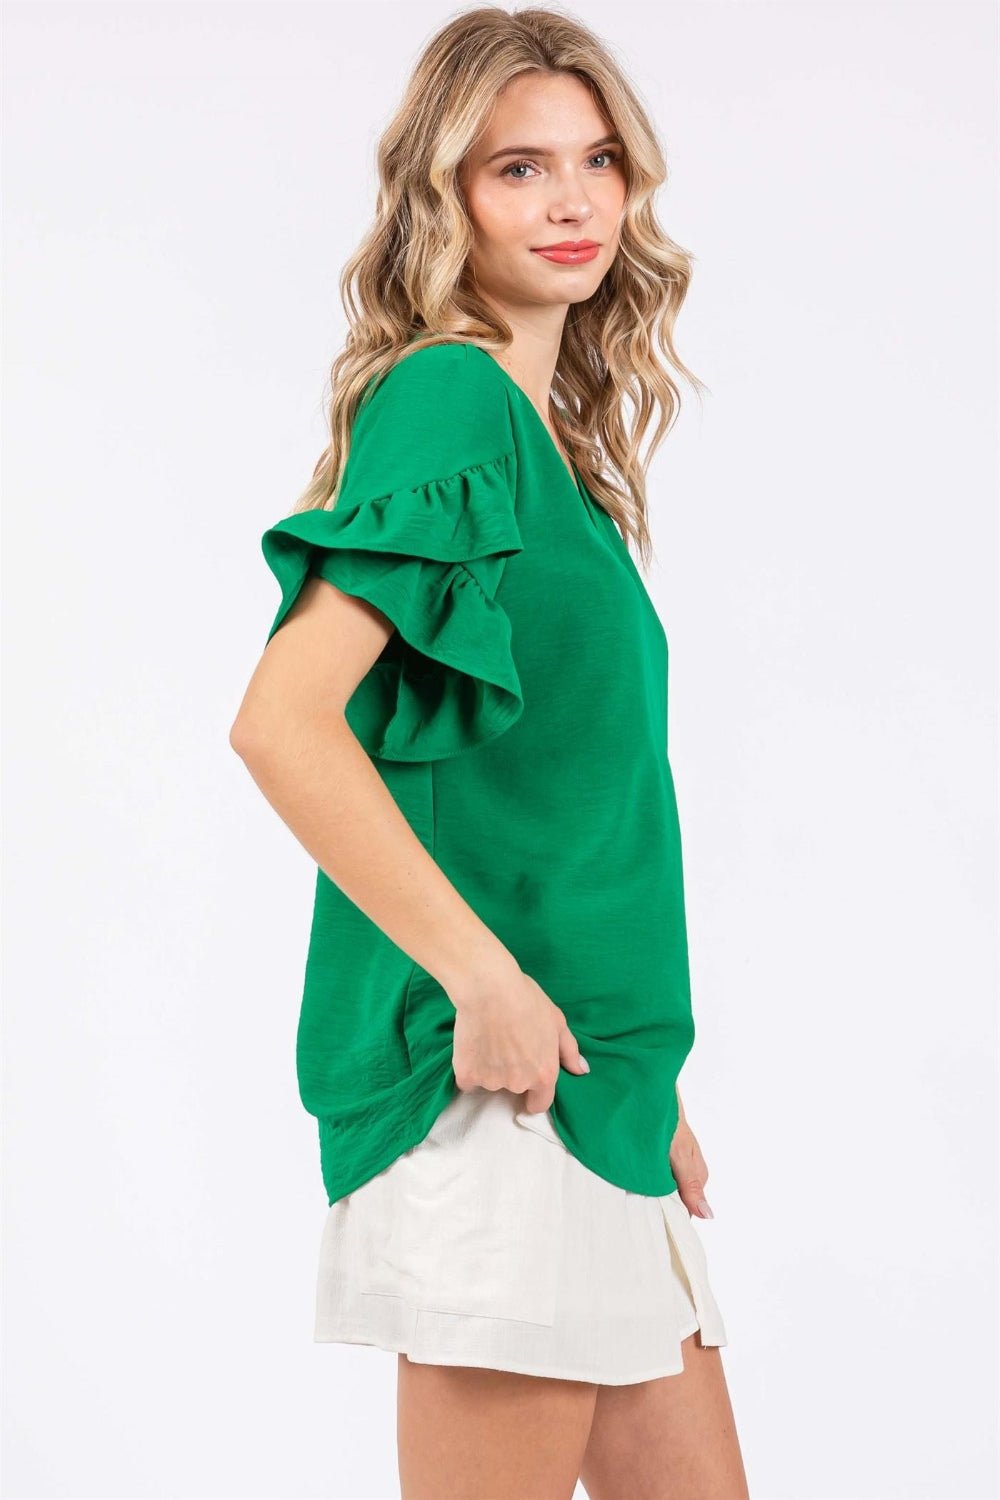 Ruffled Short Sleeve V-Neck Blouse in Kelly GreenBlouseGeeGee